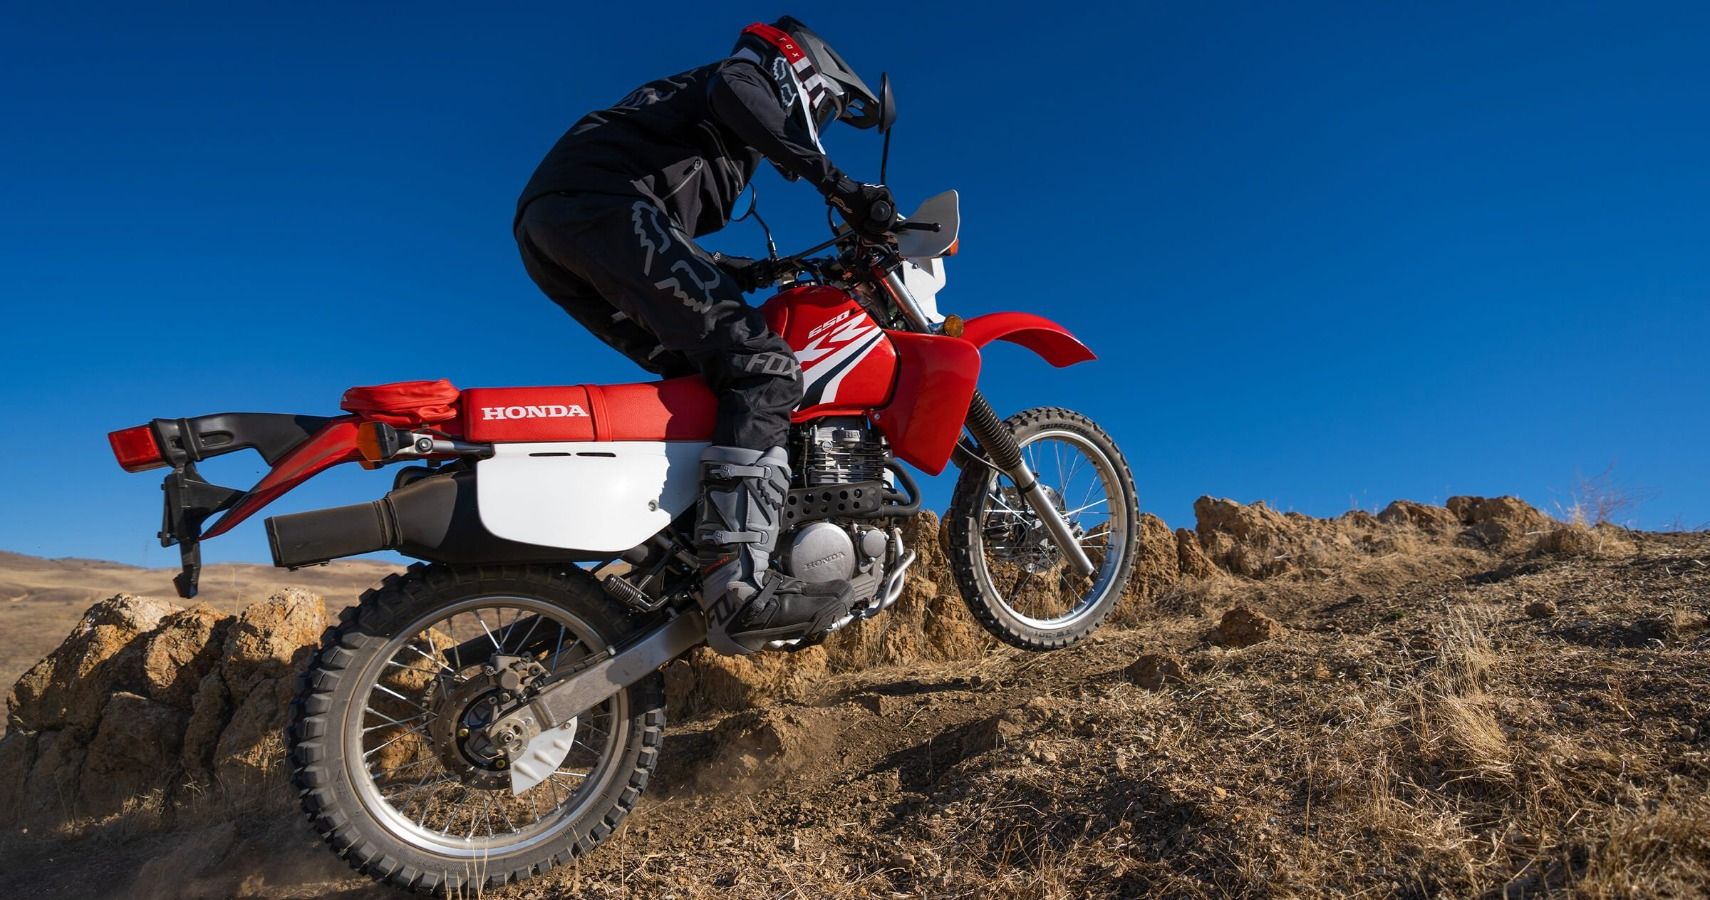 Red XR650L riding on dirt